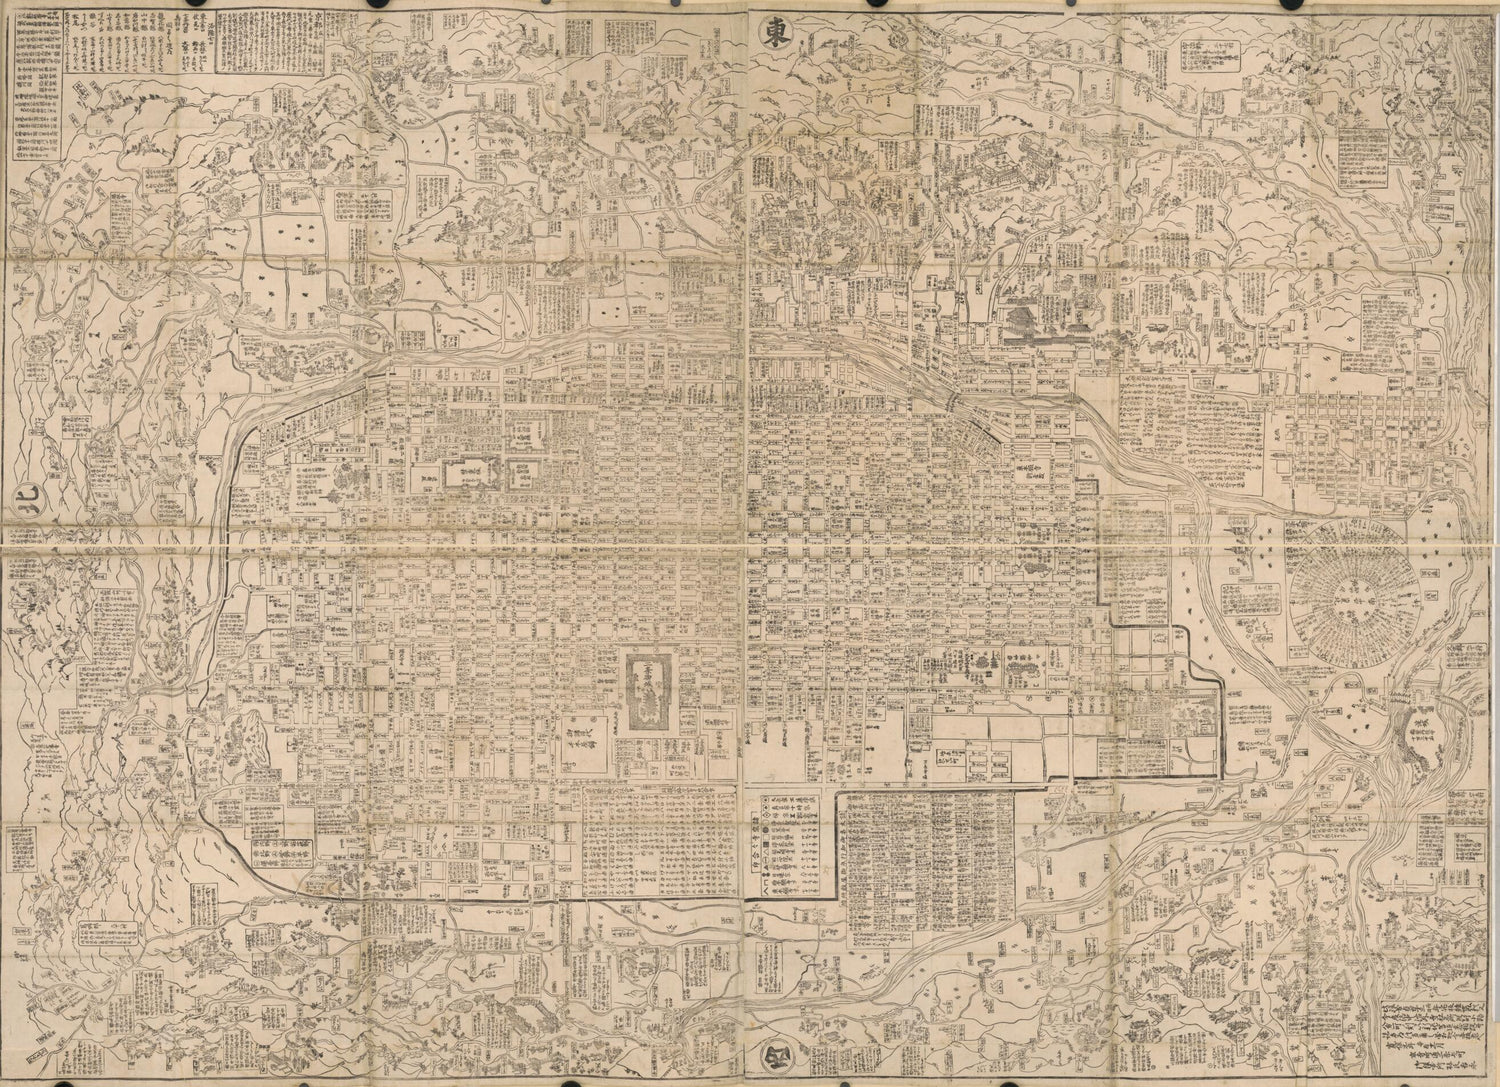 This old map of Kyōto ōezu (京都大繪圖 /) from 1741 was created by Yoshinaga Hayashi in 1741